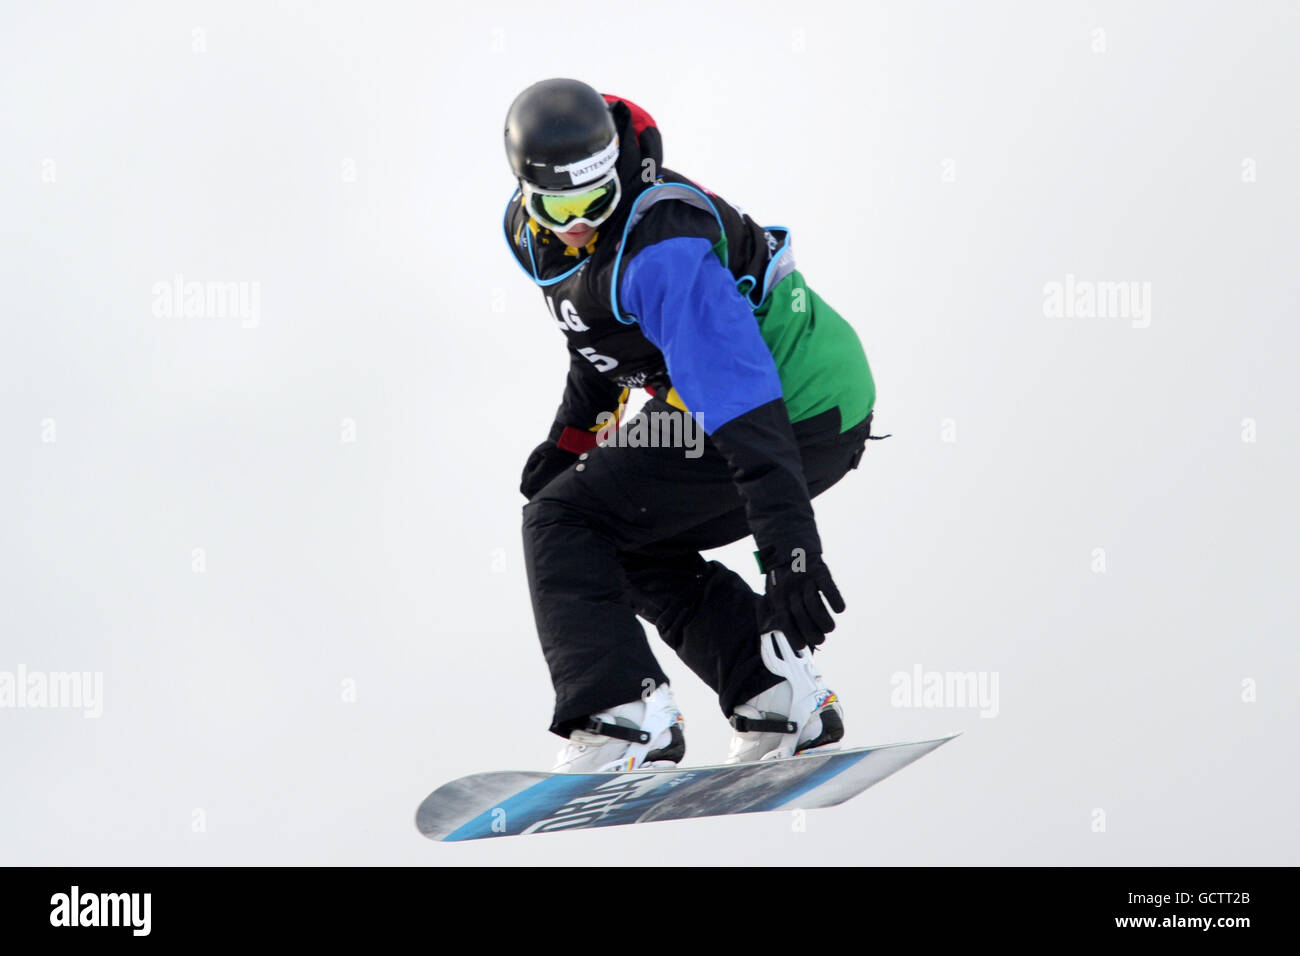 Isak Bjornstrom of Sweden during the LG Snowboard FIS World Cup in London Stock Photo